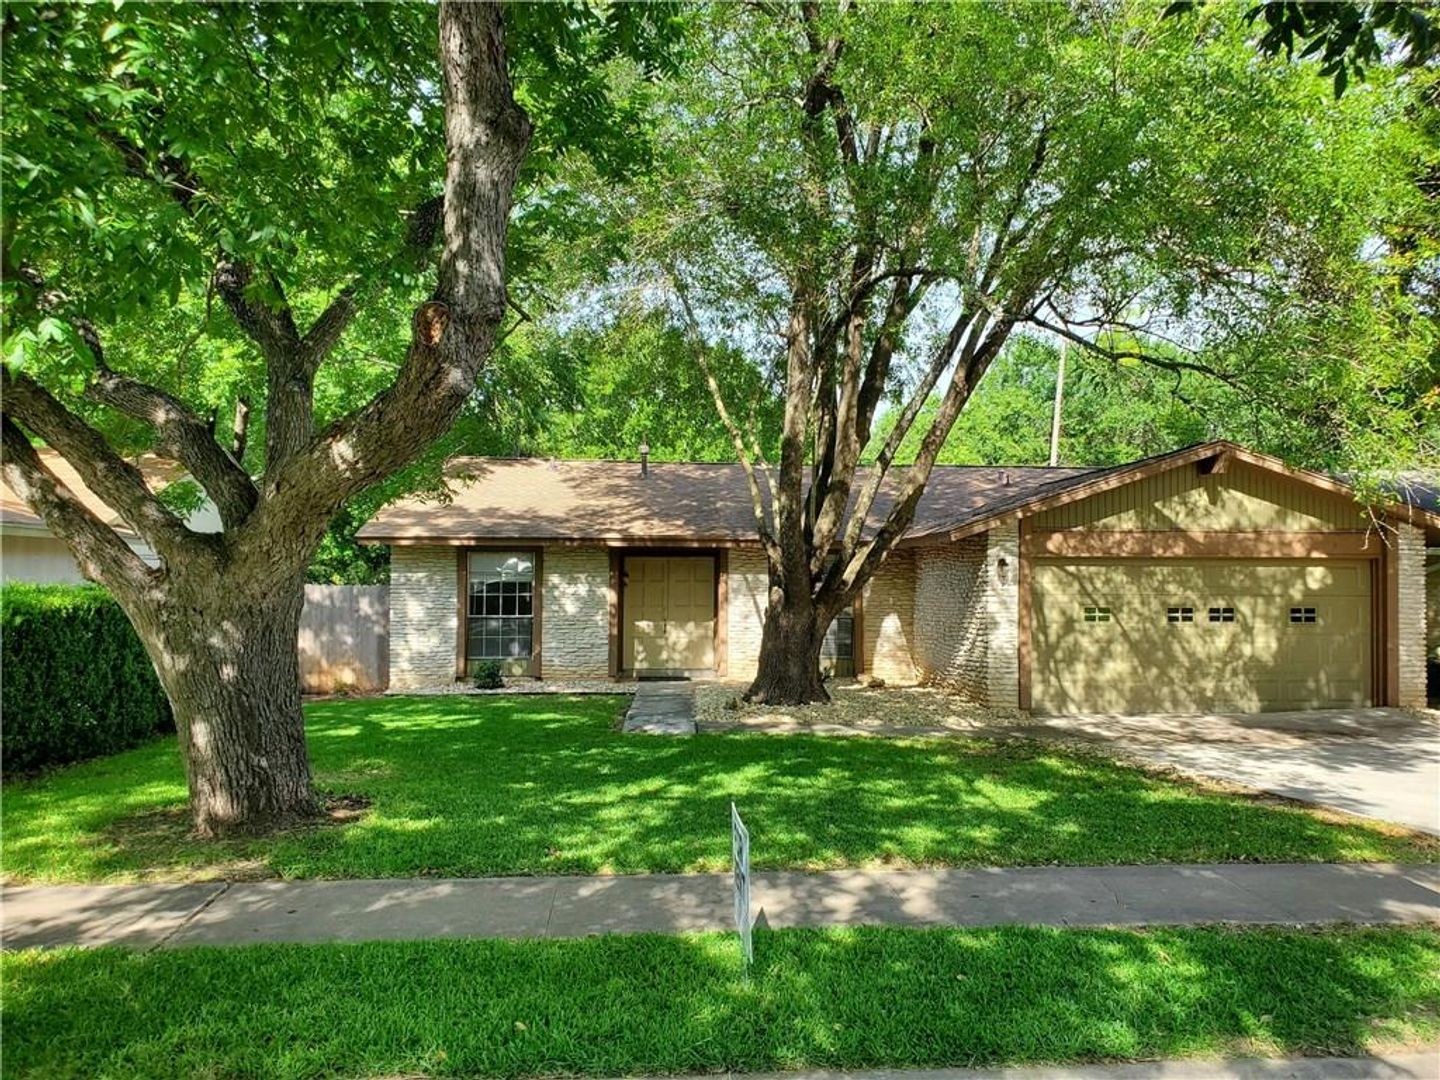 Northwest Austin One Story / Anderson Mill Area / Walk to Parks & Schools / Minutes to Apple & Domain